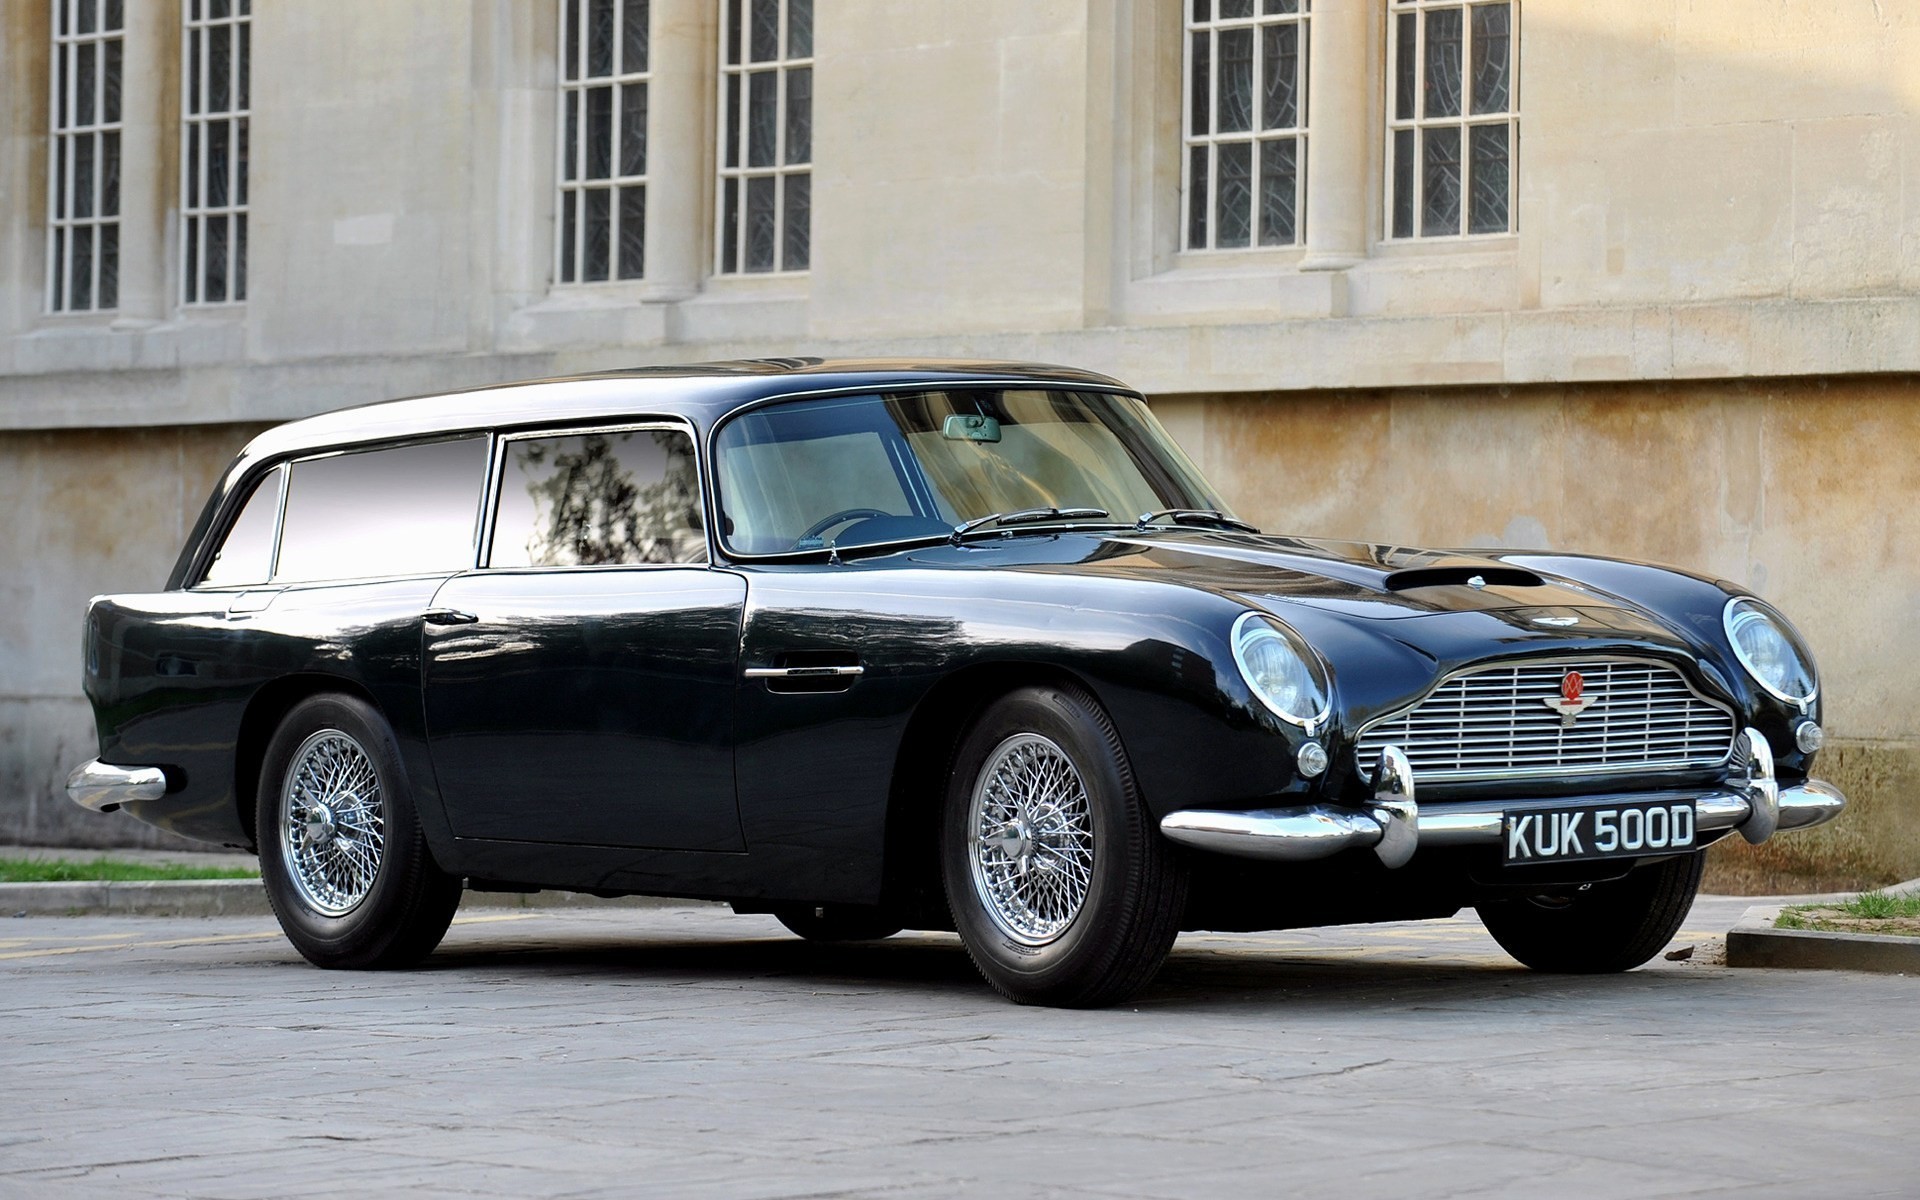 1920x1200 Aston Martin Db5 Wallpaper Hd Photos Wallpapers And Other Images Iphone